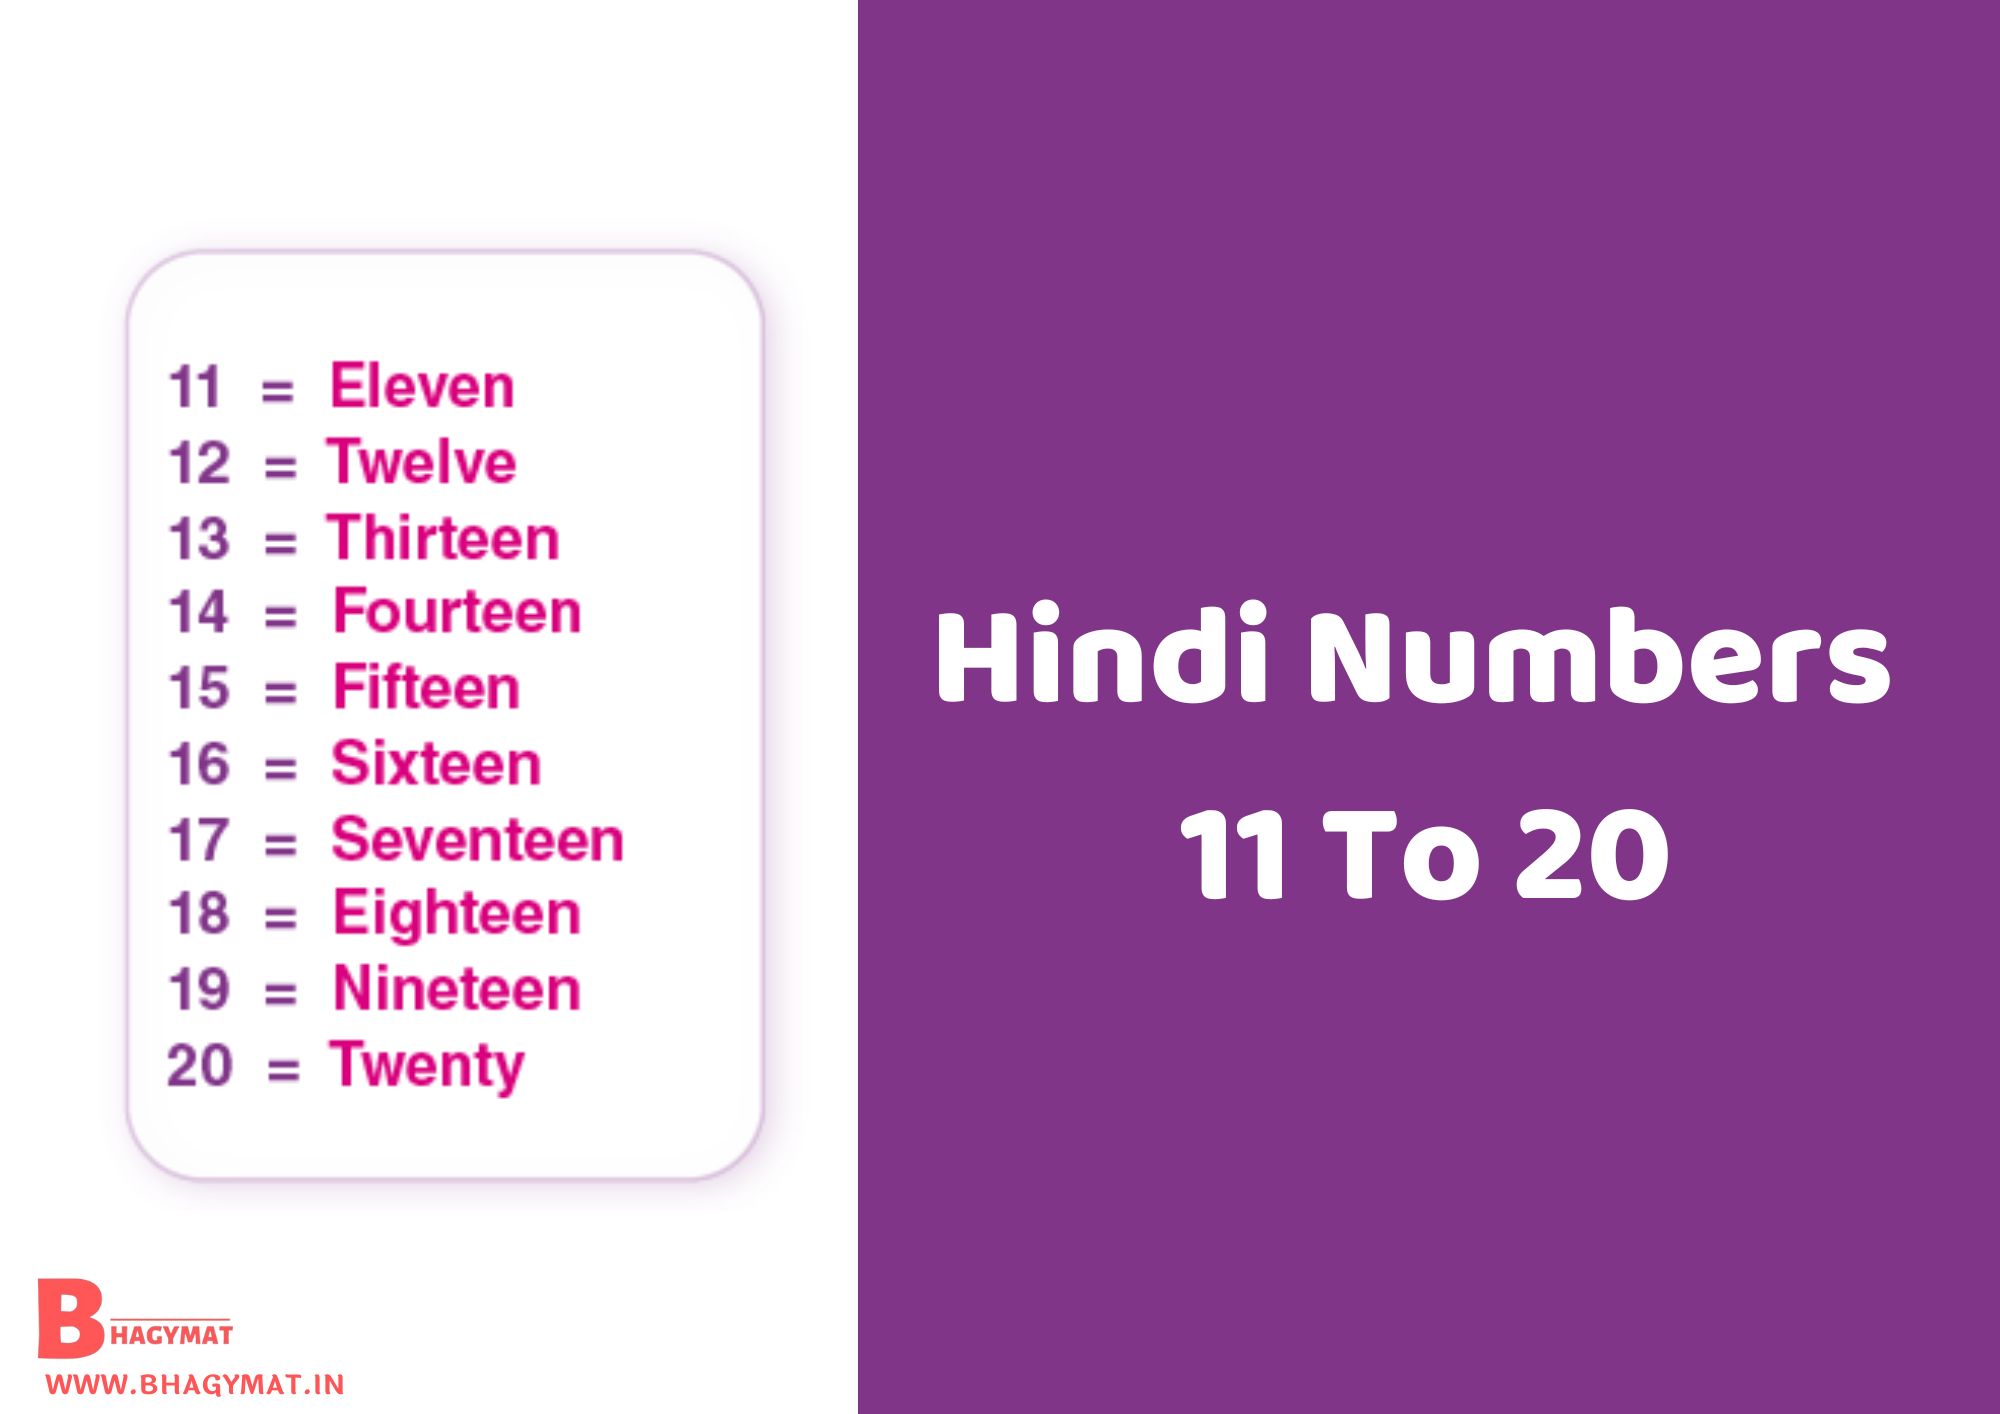 Hindi Numbers 11 To 20 | 11 To 20 Numbers In Hindi And English